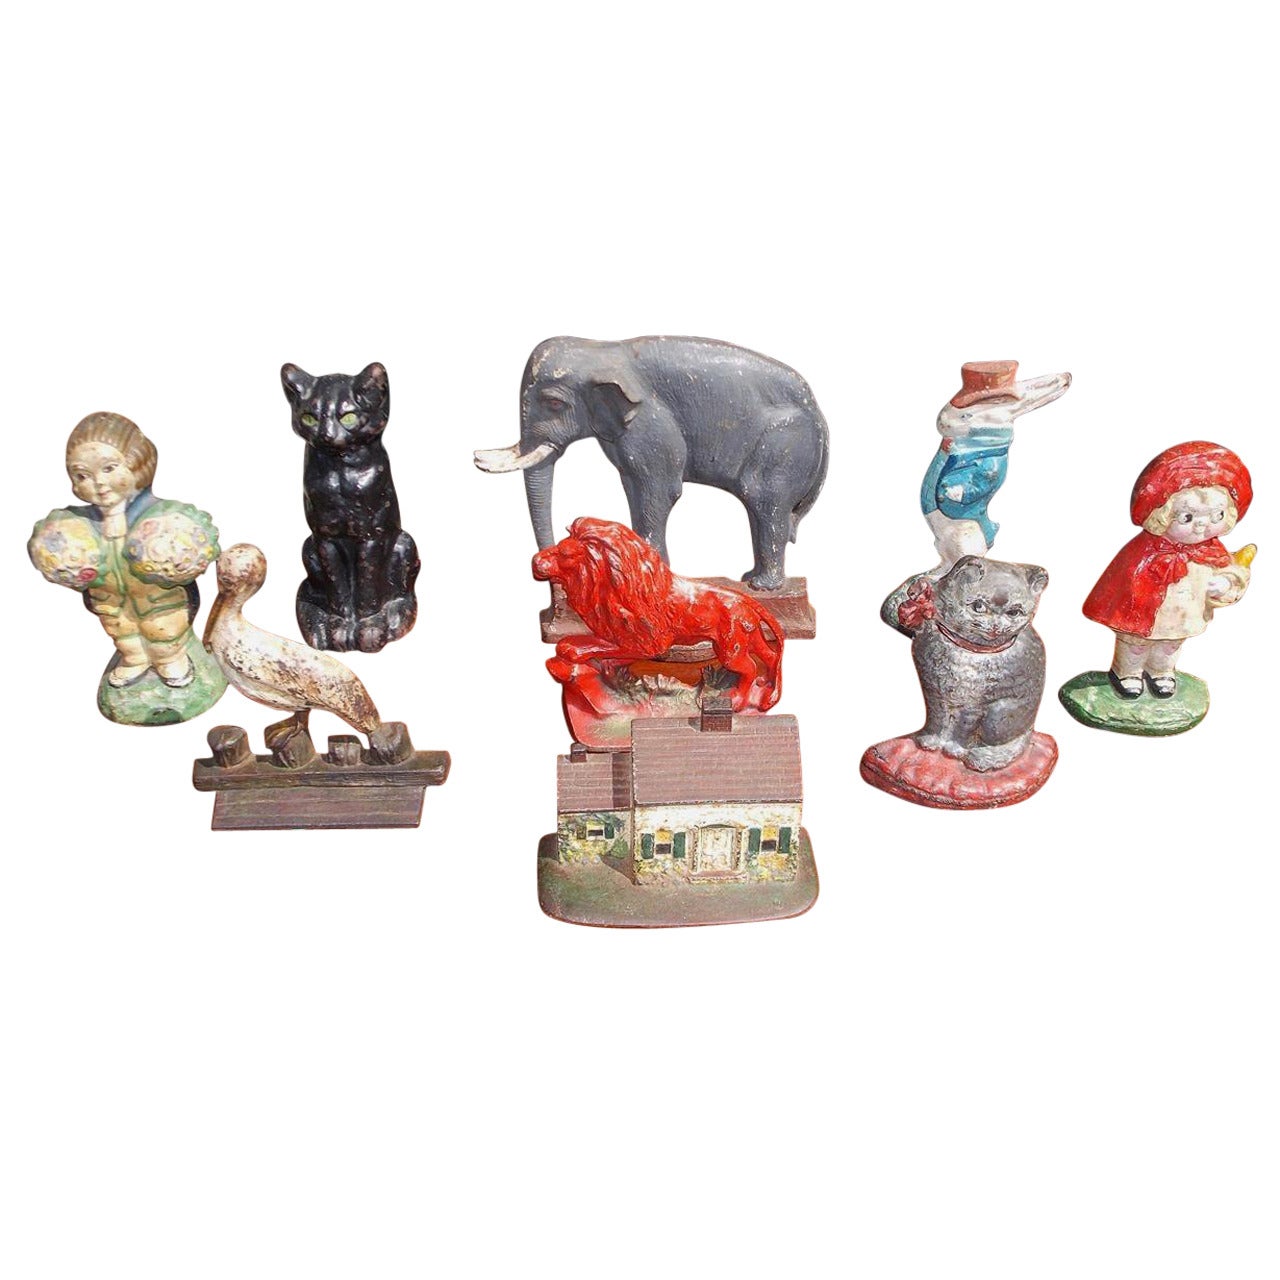 Set of cast iron vibrantly painted decorative doorstops, Early 20th century.
Set consist of elephant, rabbit, lion, two cats, two young ladies and country cottage. Select doorstops are signed by maker. Many more options to select from in our